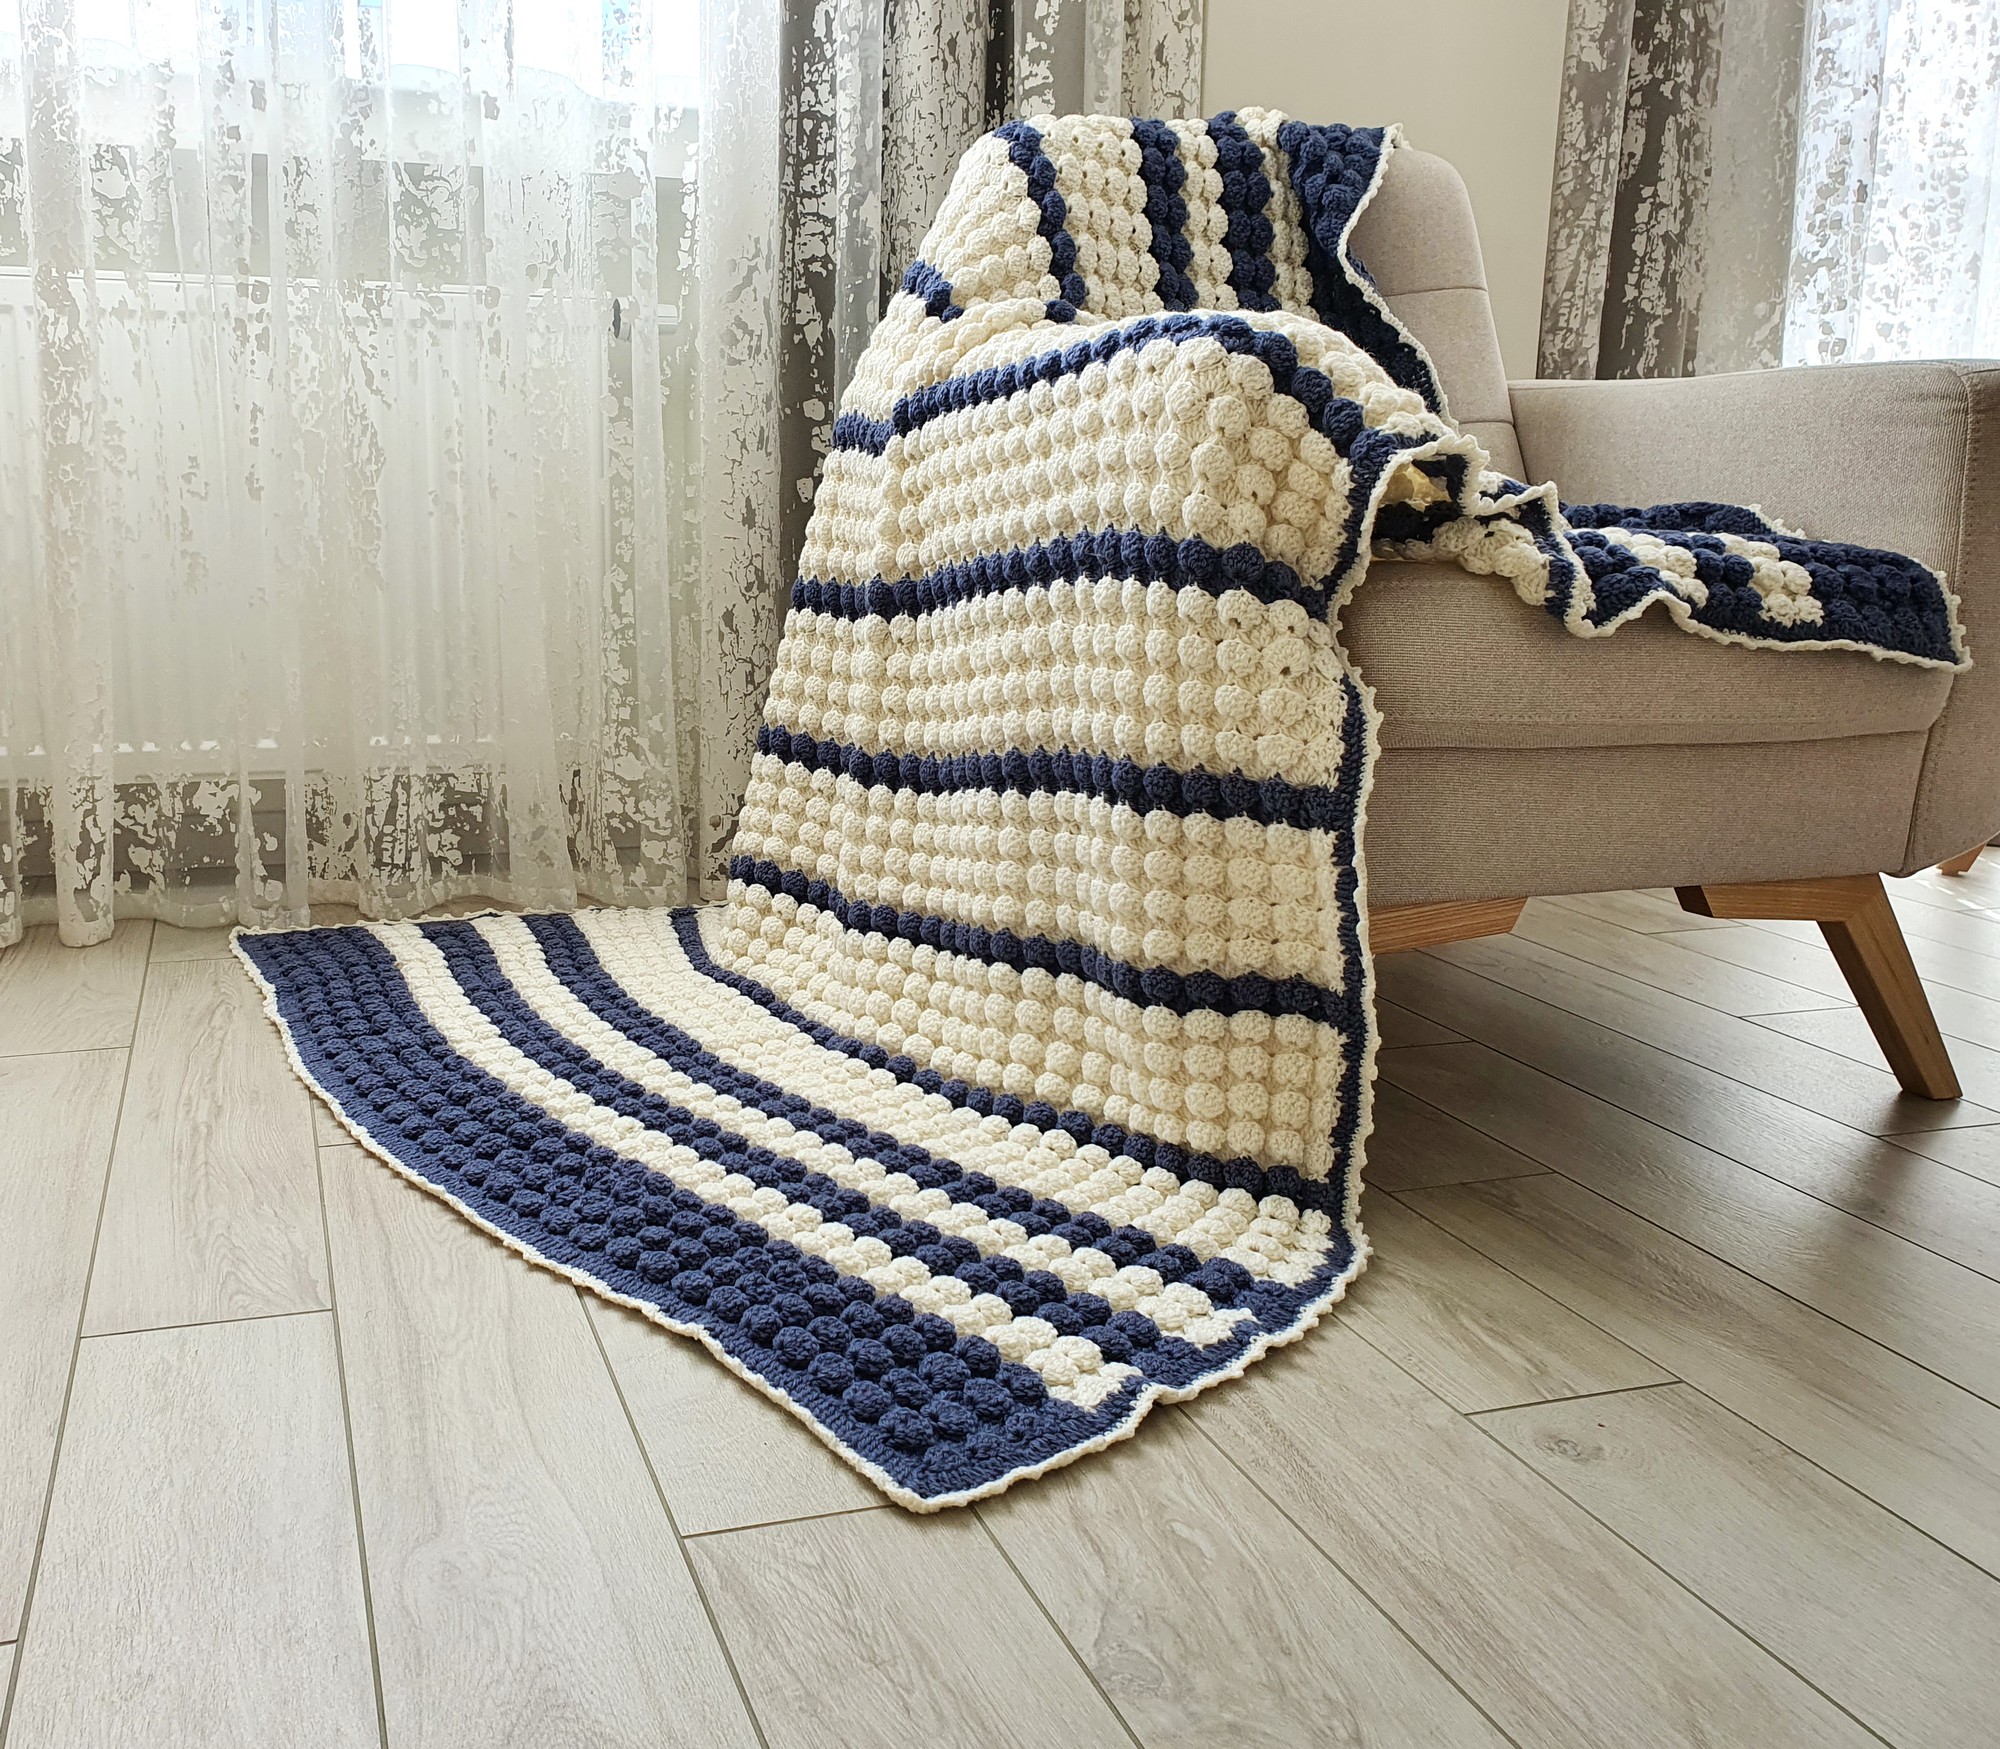 Crochet wool blanket white and blue striped wool knit throw